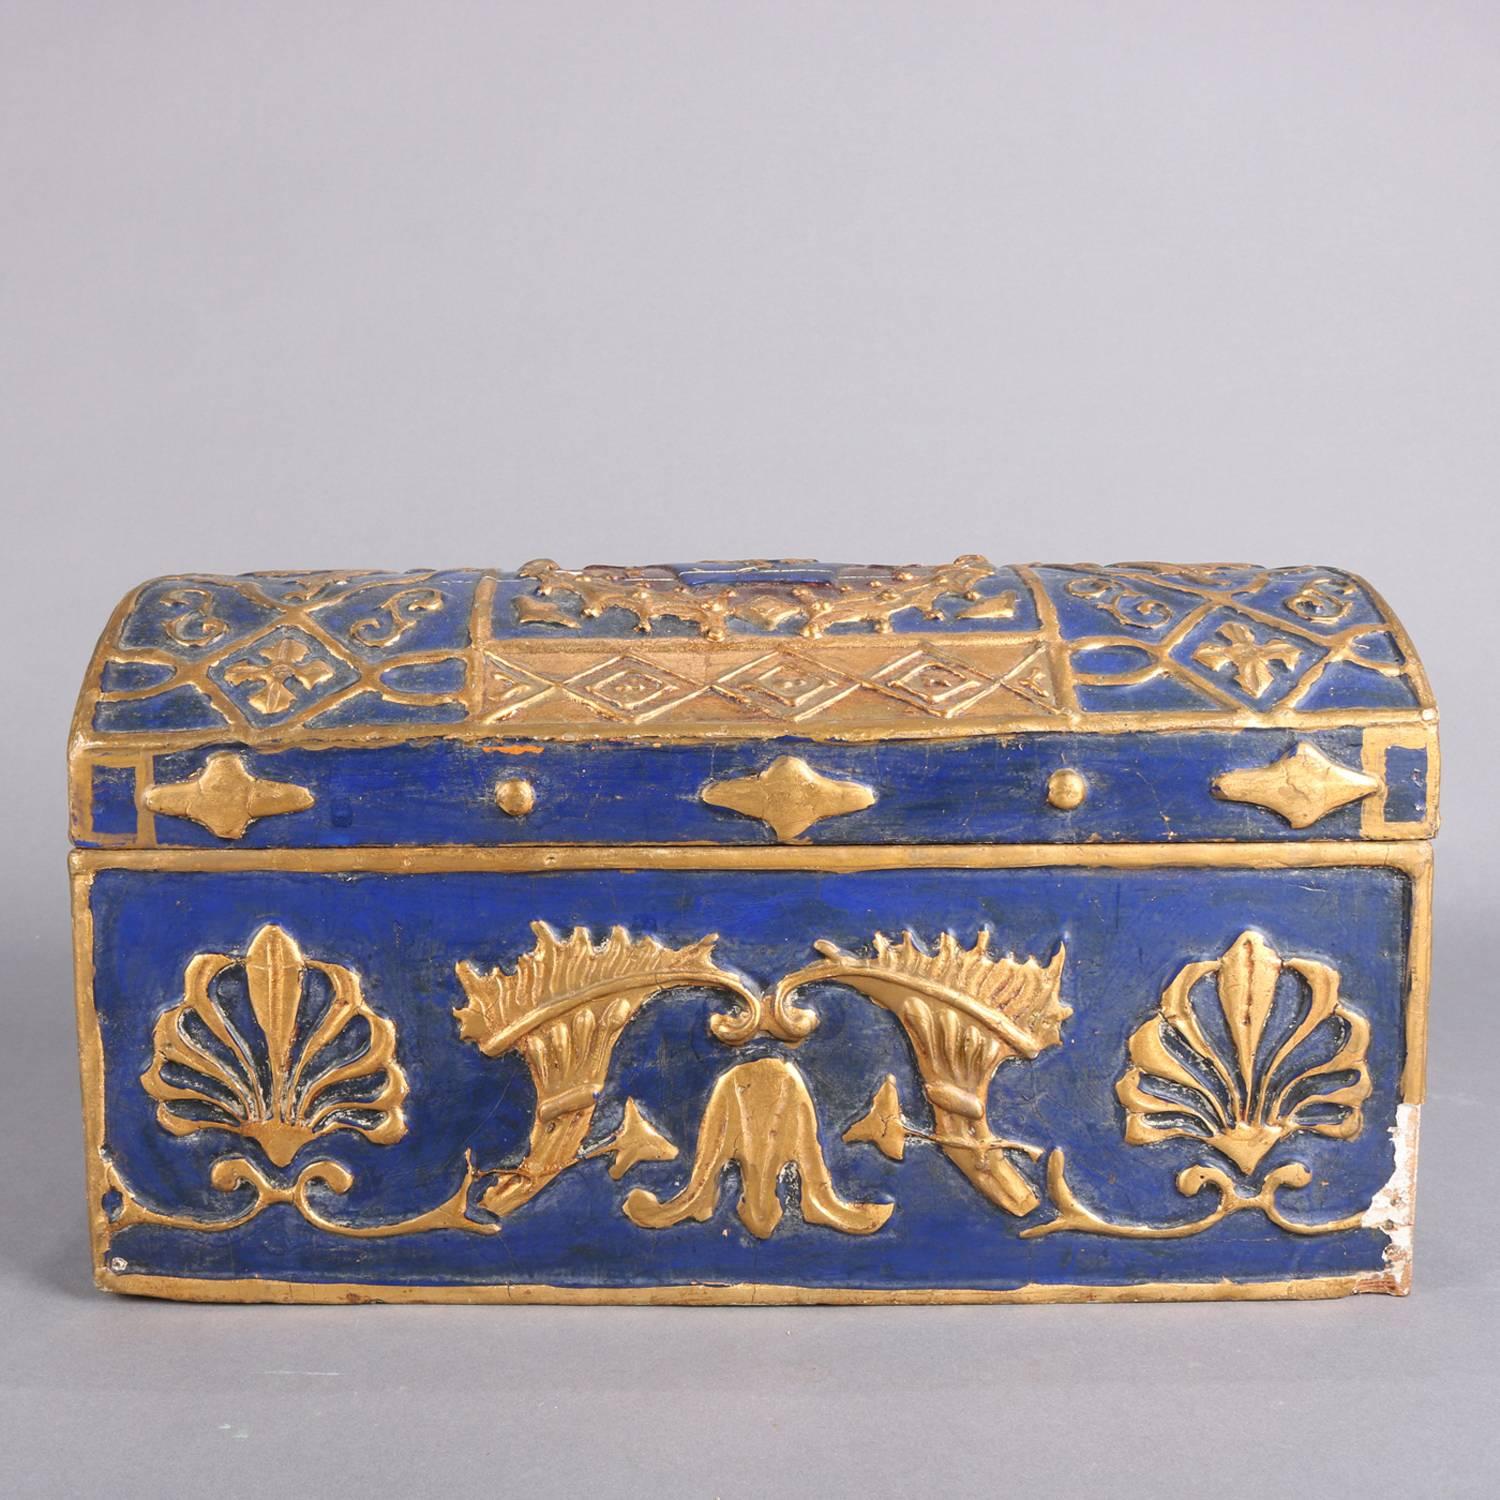 French neoclassical carved wood and plaster hinged dresser box features gilt palmette, scroll and foliate decoration, domed lid having central reserve with lion rampant, lined, 19th century

Measures: 7